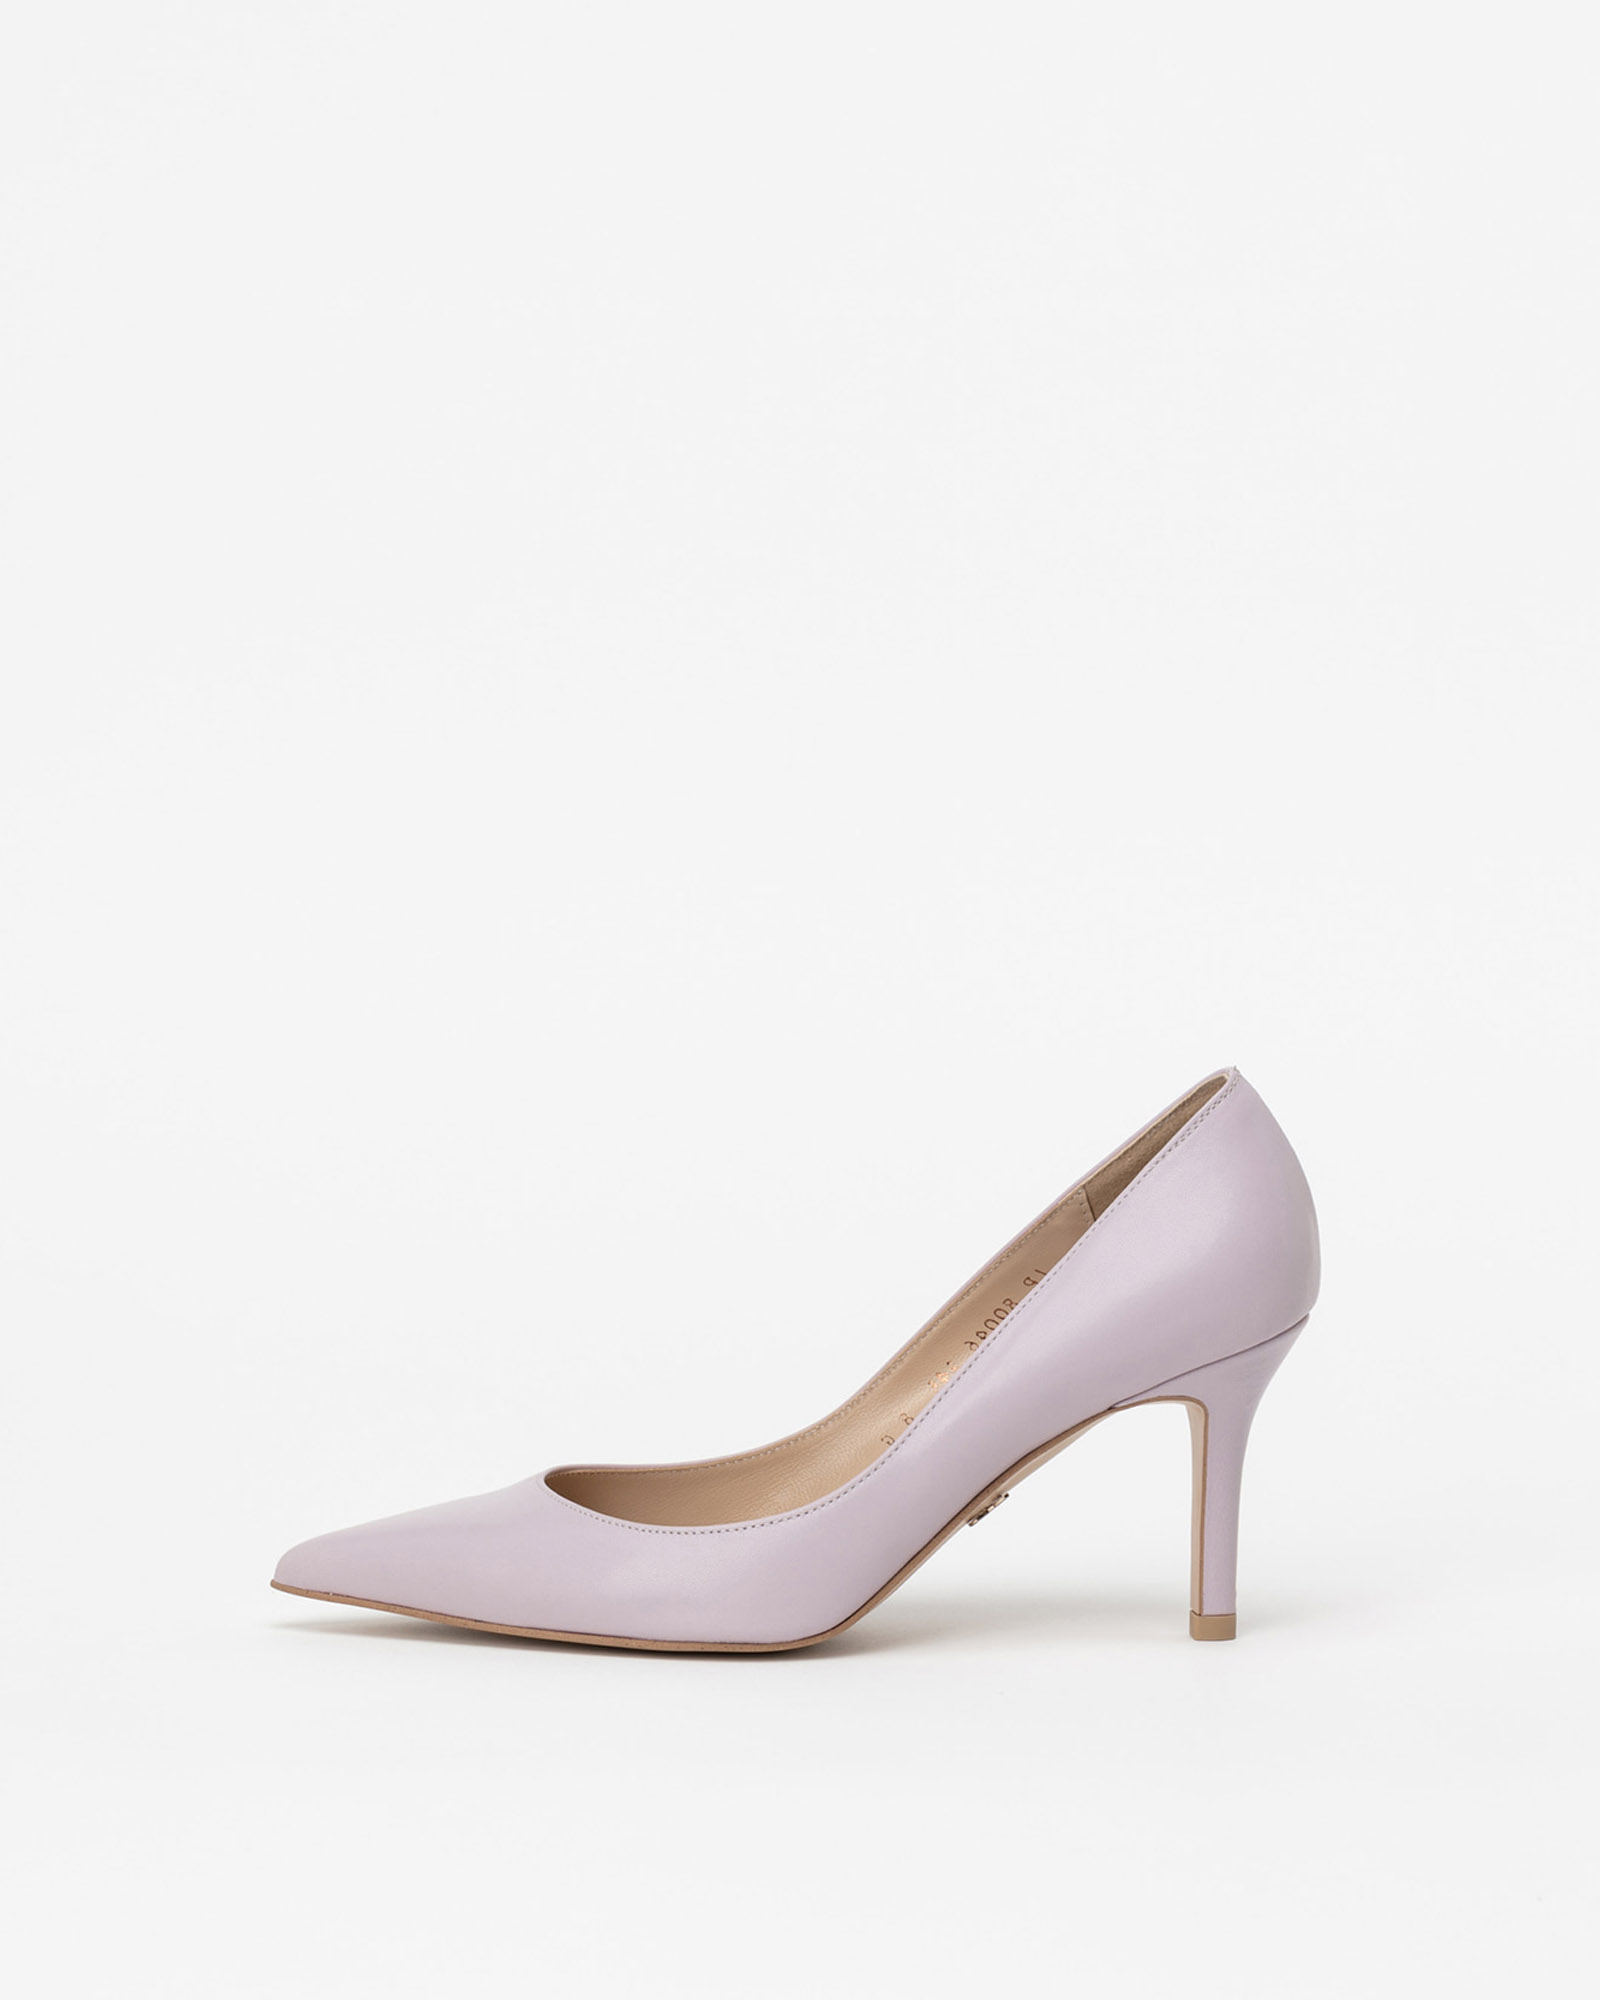 Maybel Stiletto Pumps in Orchid Ice